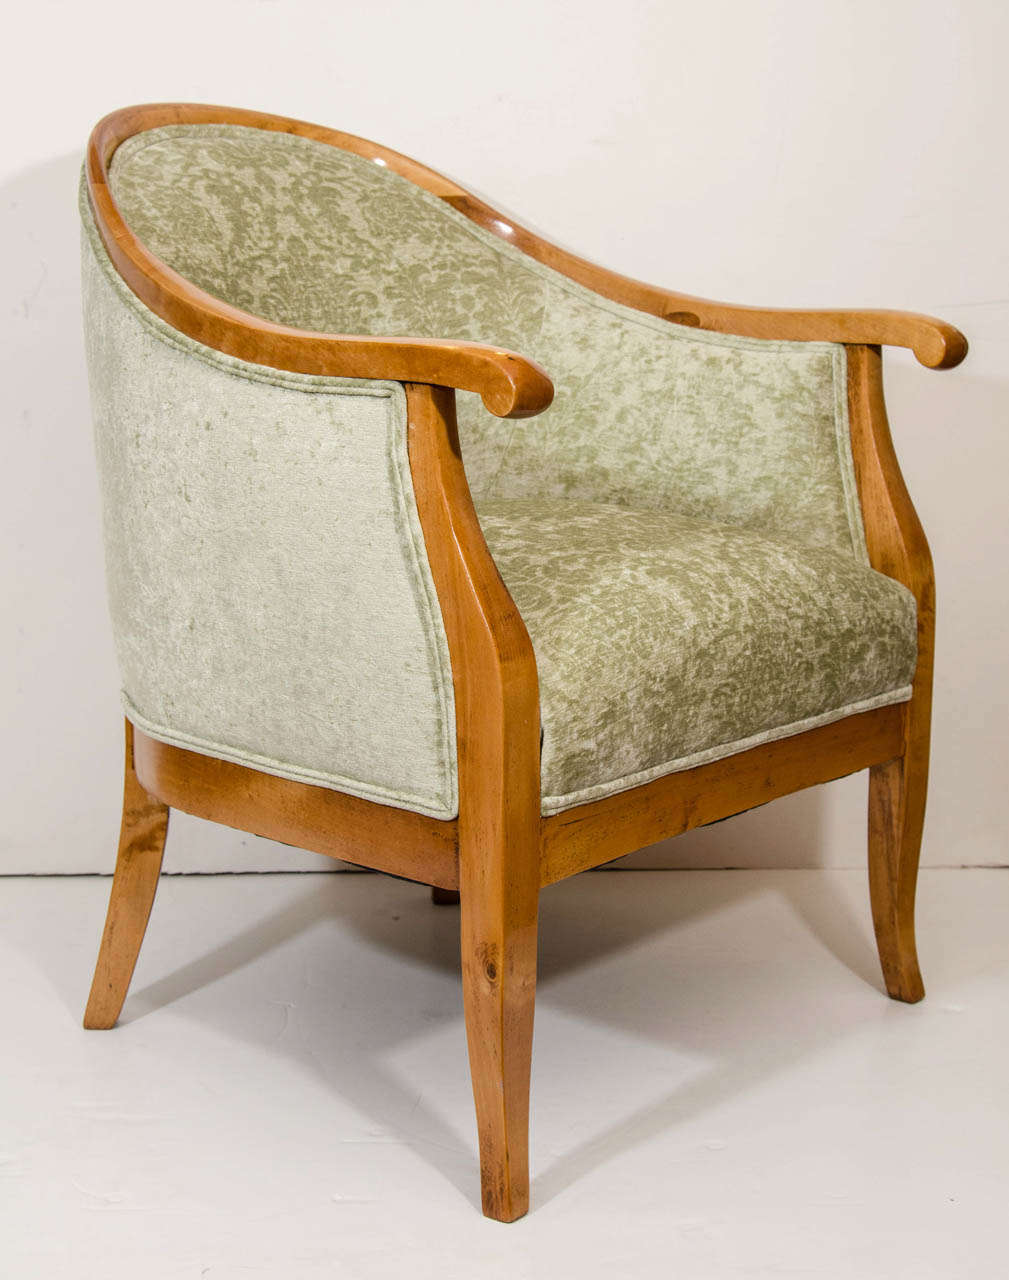 Carved from solid birch and stained a light caramel tone, the deep sprung seats and upholstered, curved backs provide tailored as well as tasteful comfort.